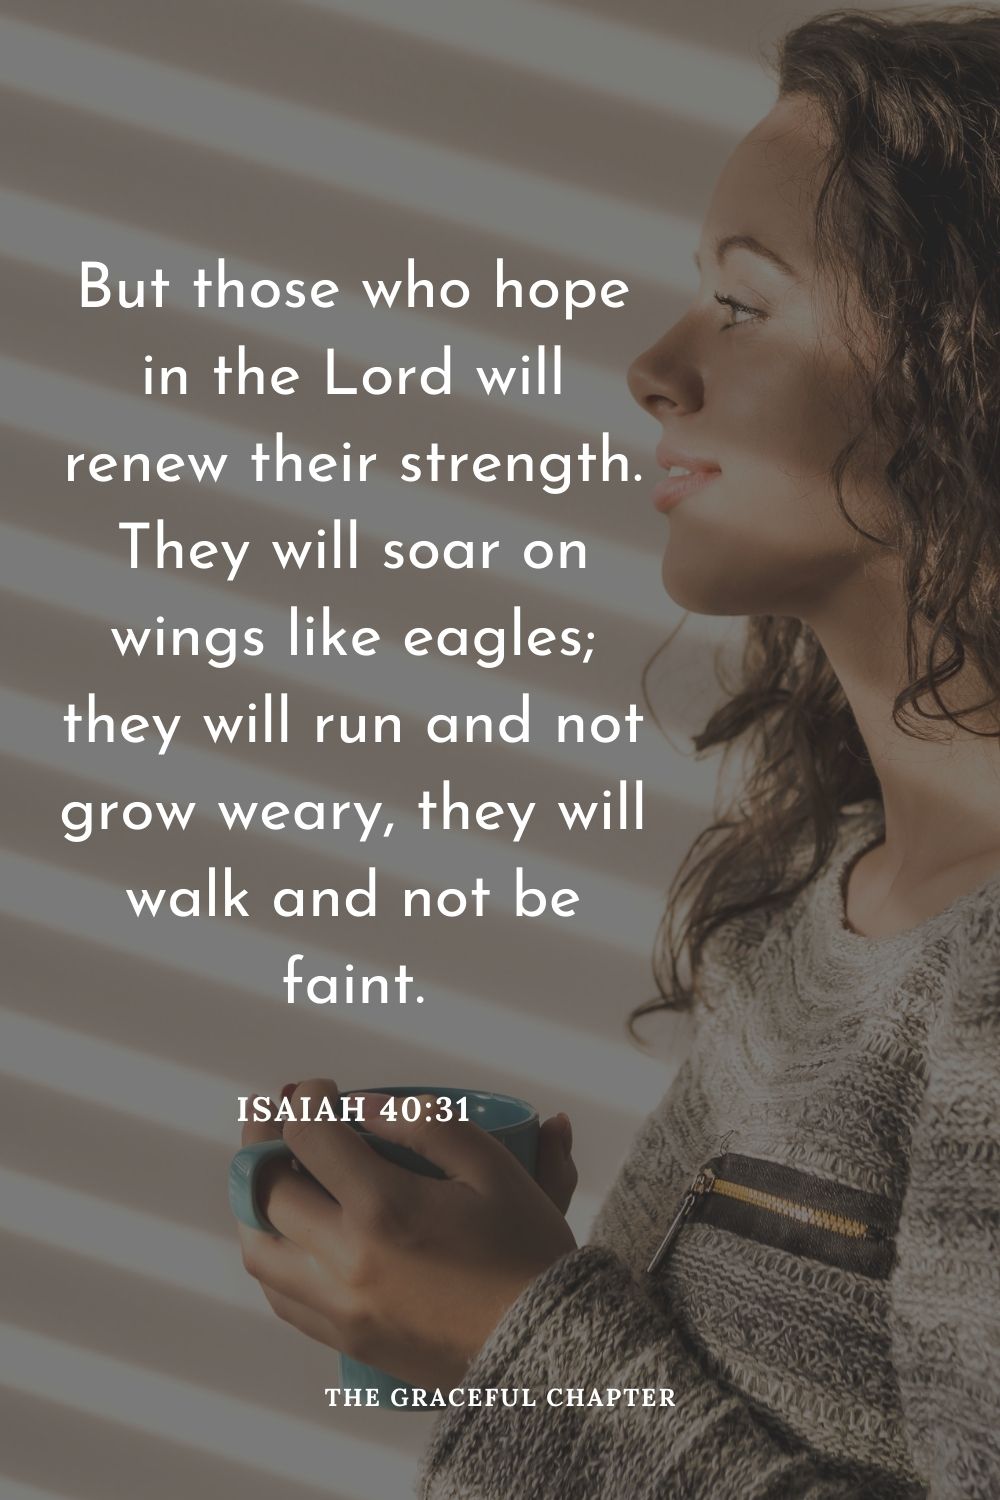 But those who hope in the Lord will renew their strength. They will soar on wings like eagles; they will run and not grow weary, they will walk and not be faint.